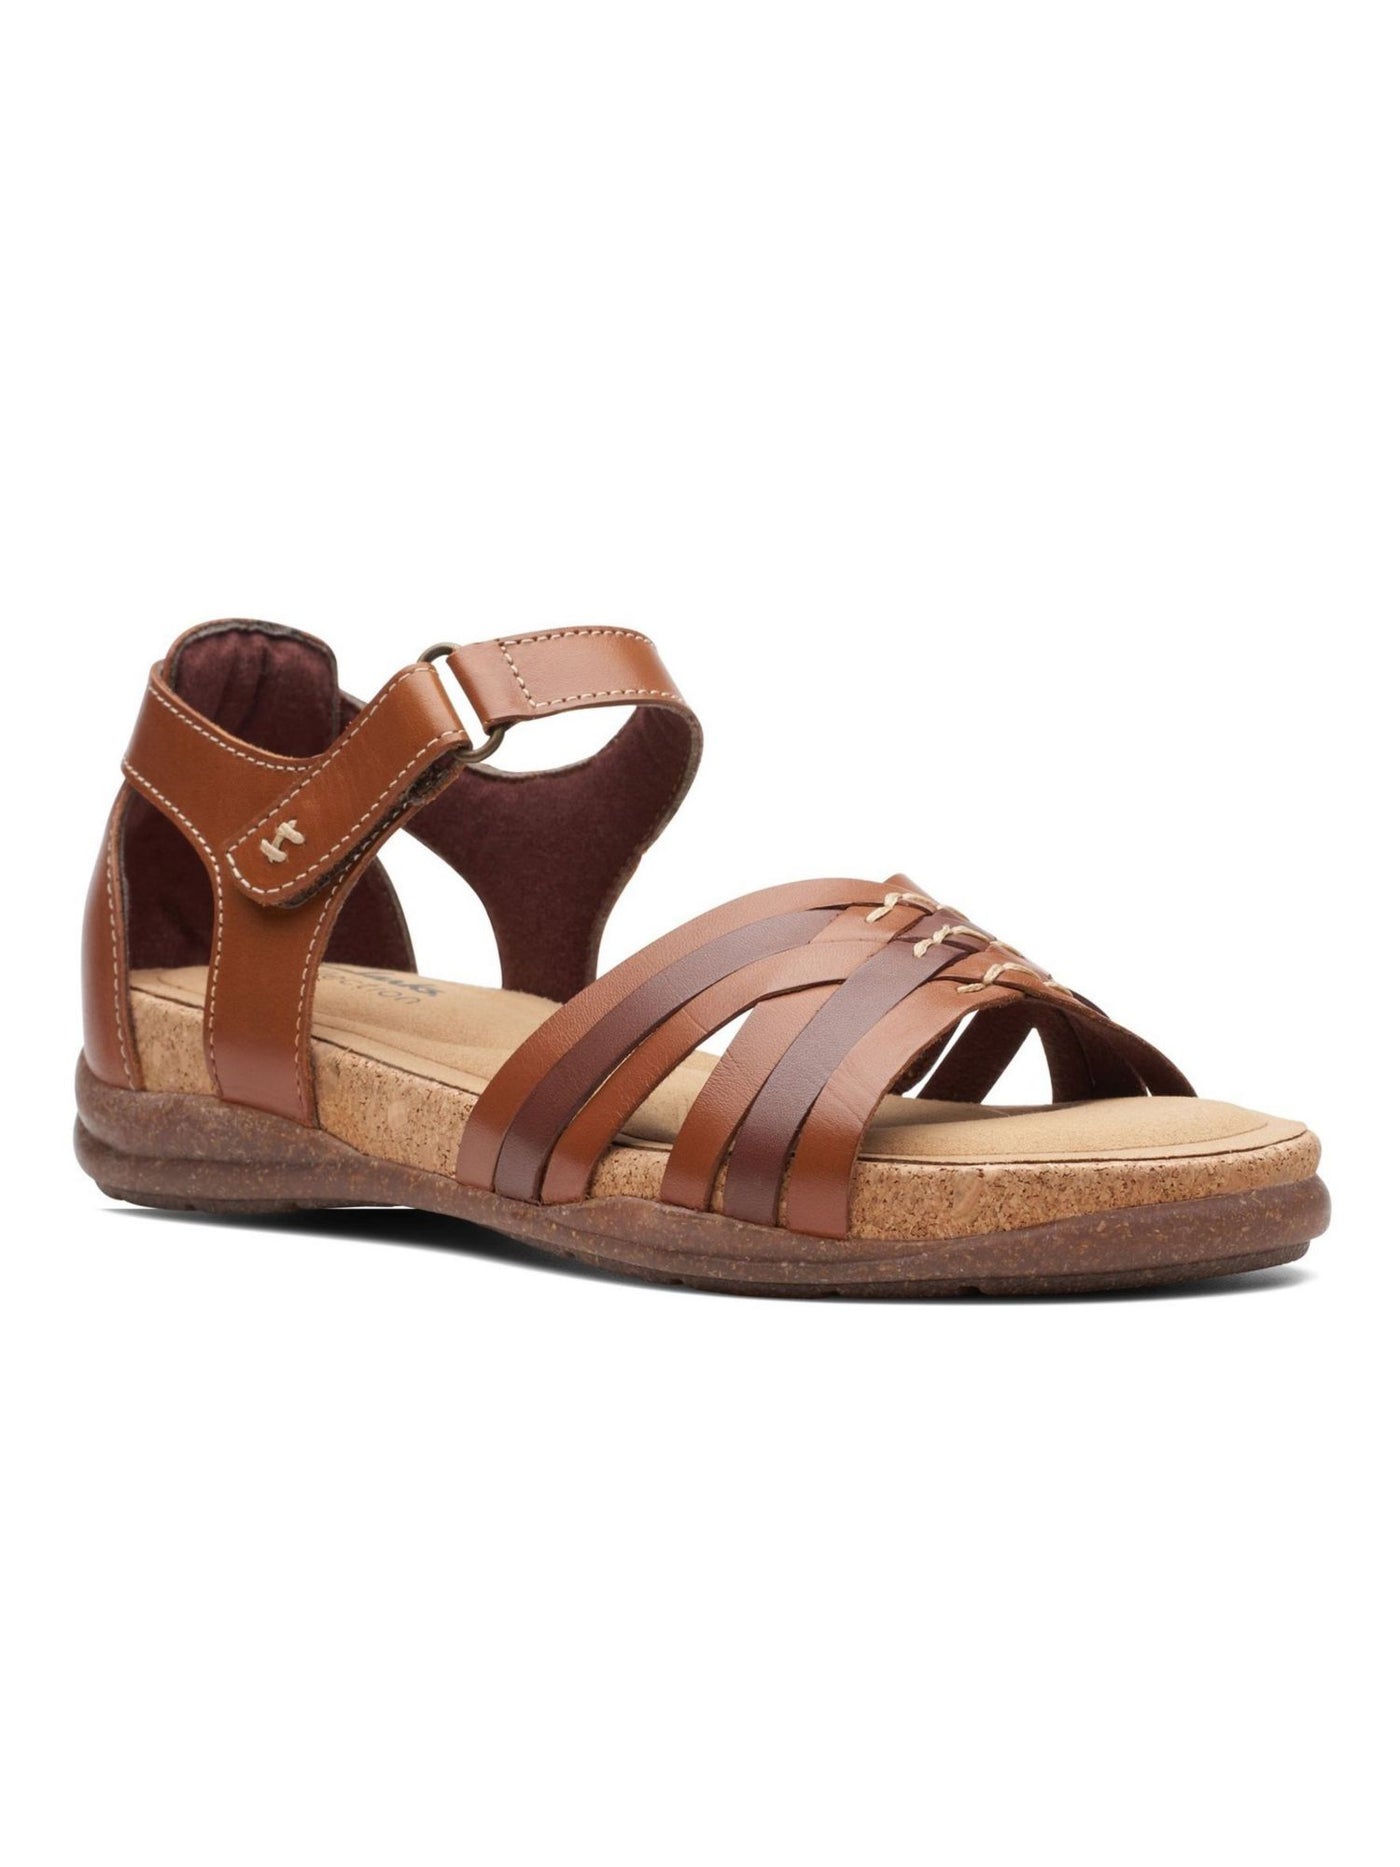 COLLECTION BY CLARKS Womens Brown Strappy Arch Support Padded Roseville Cove Round Toe Wedge Leather Sandals Shoes 7.5 M